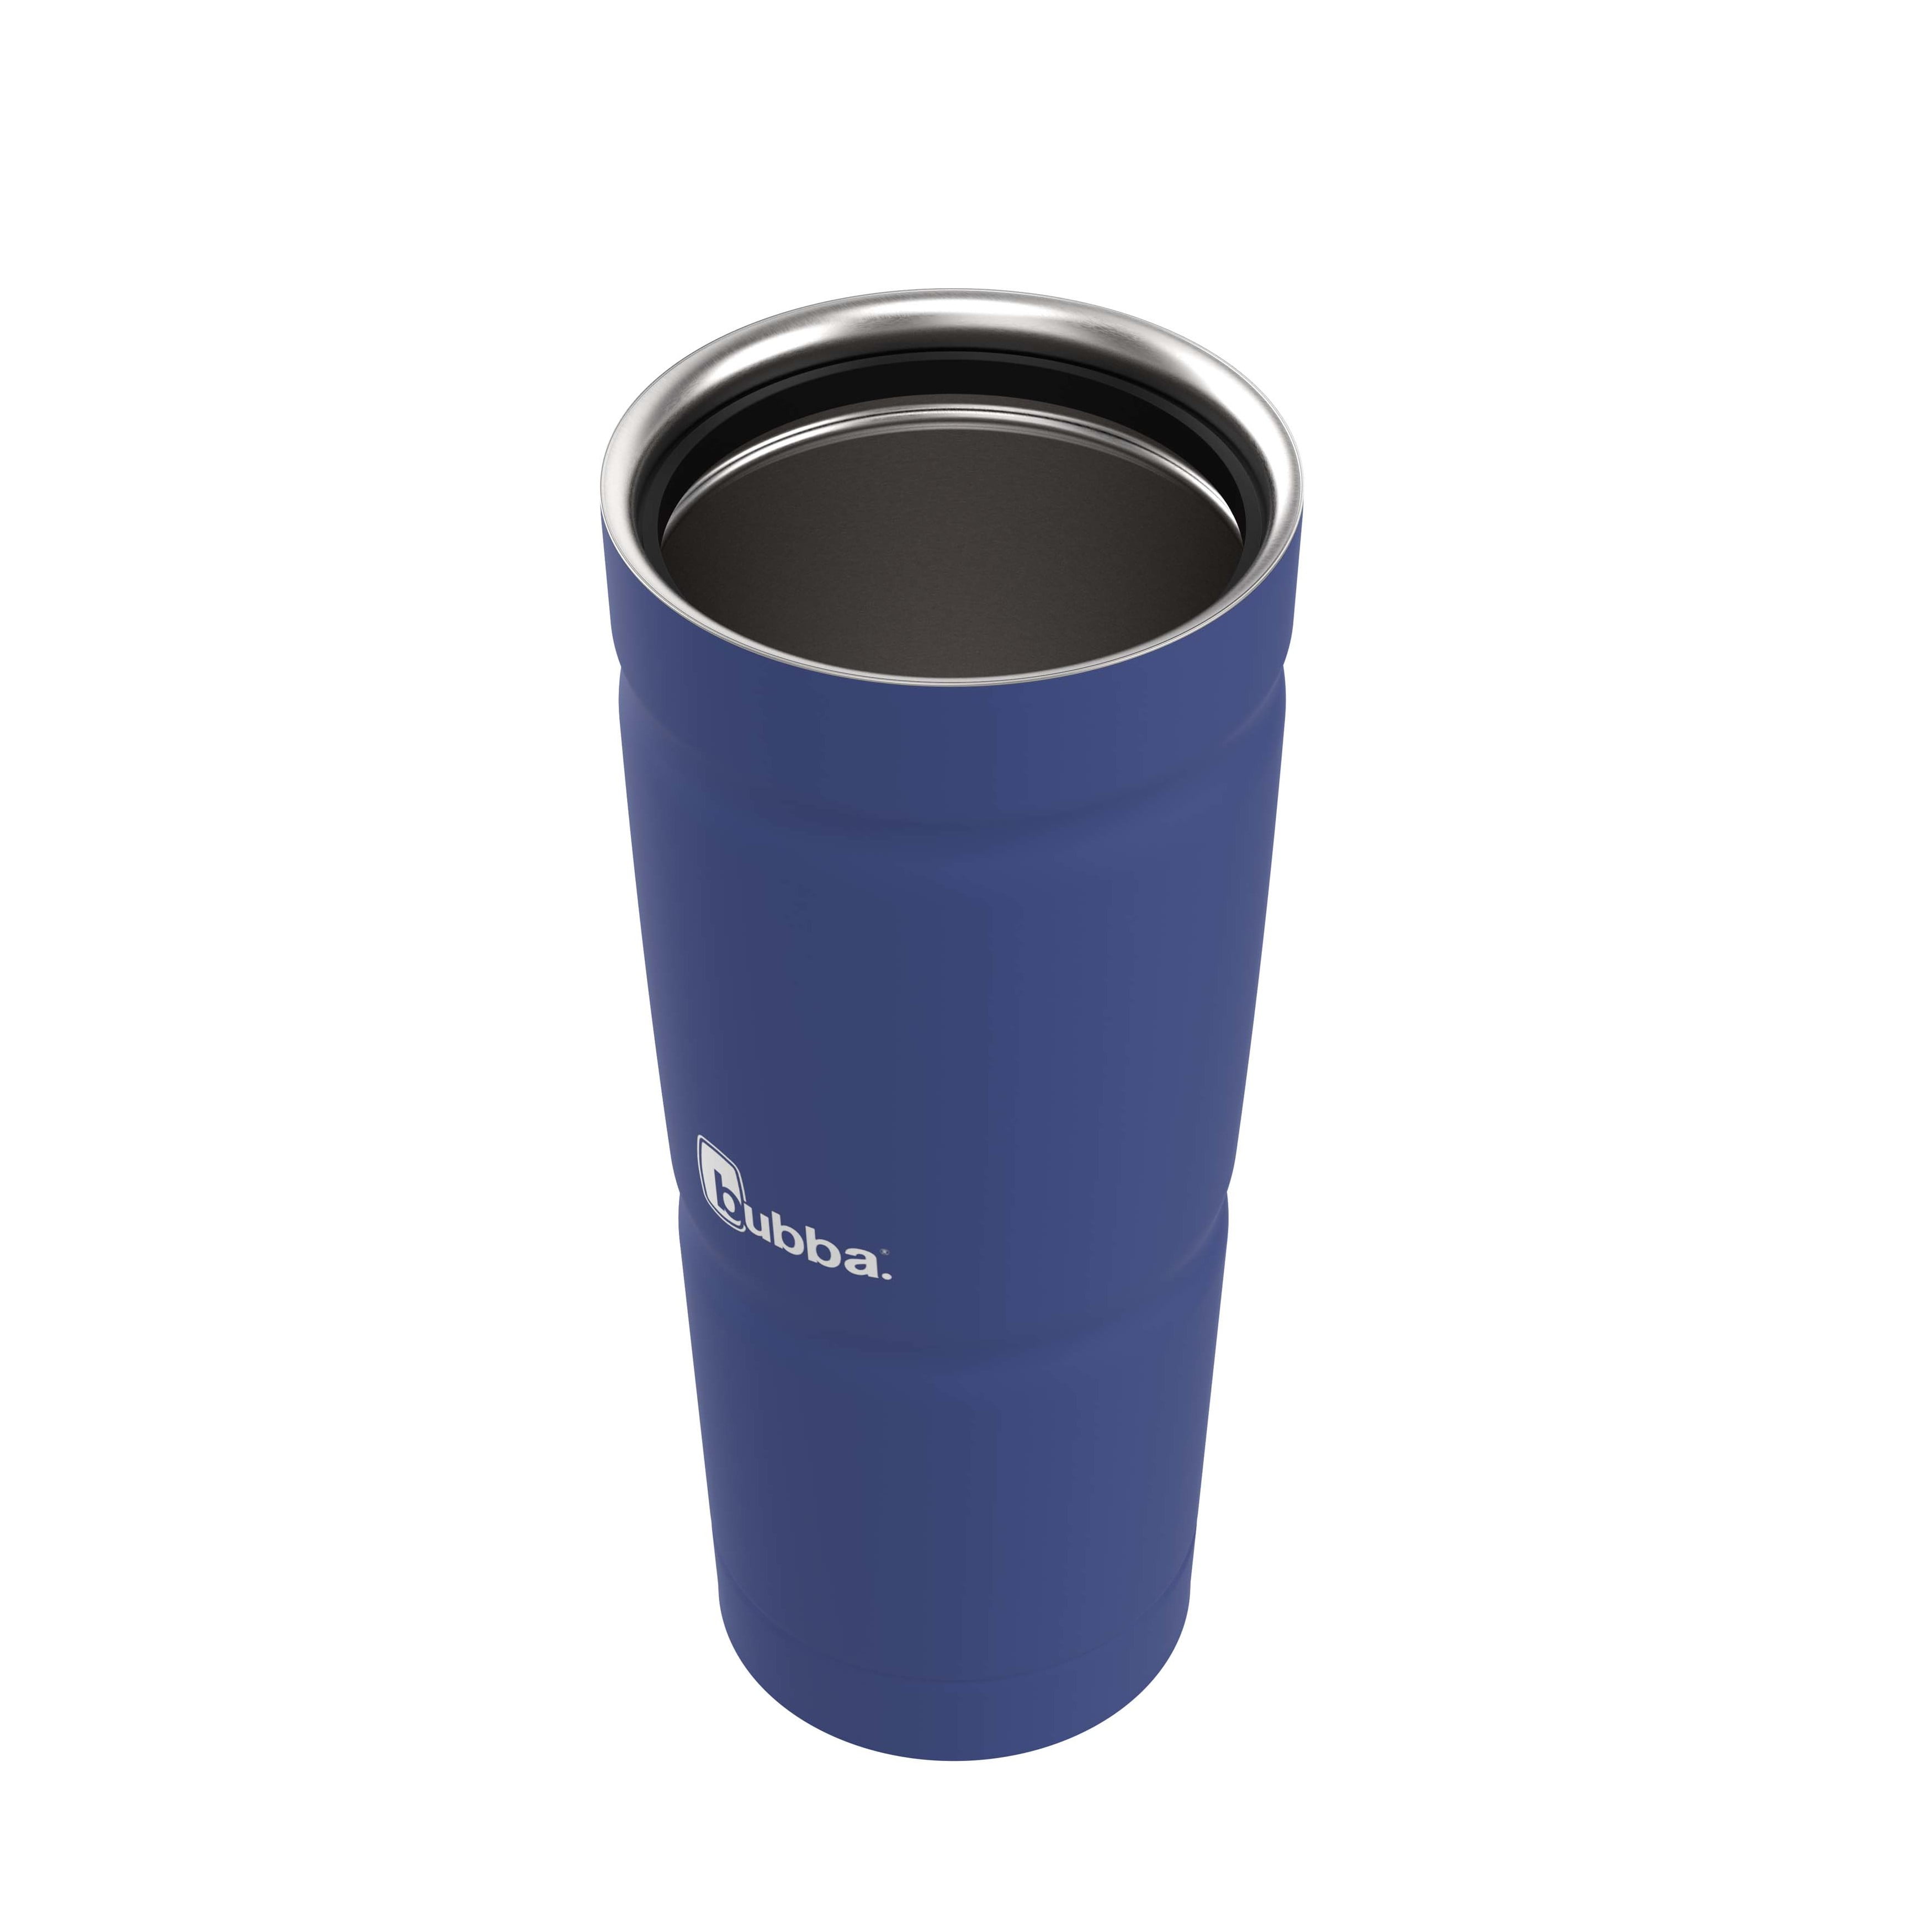 Bubba Envy Insulated Stainless Steel Tumbler with Straw: A Budget To-Go Cup